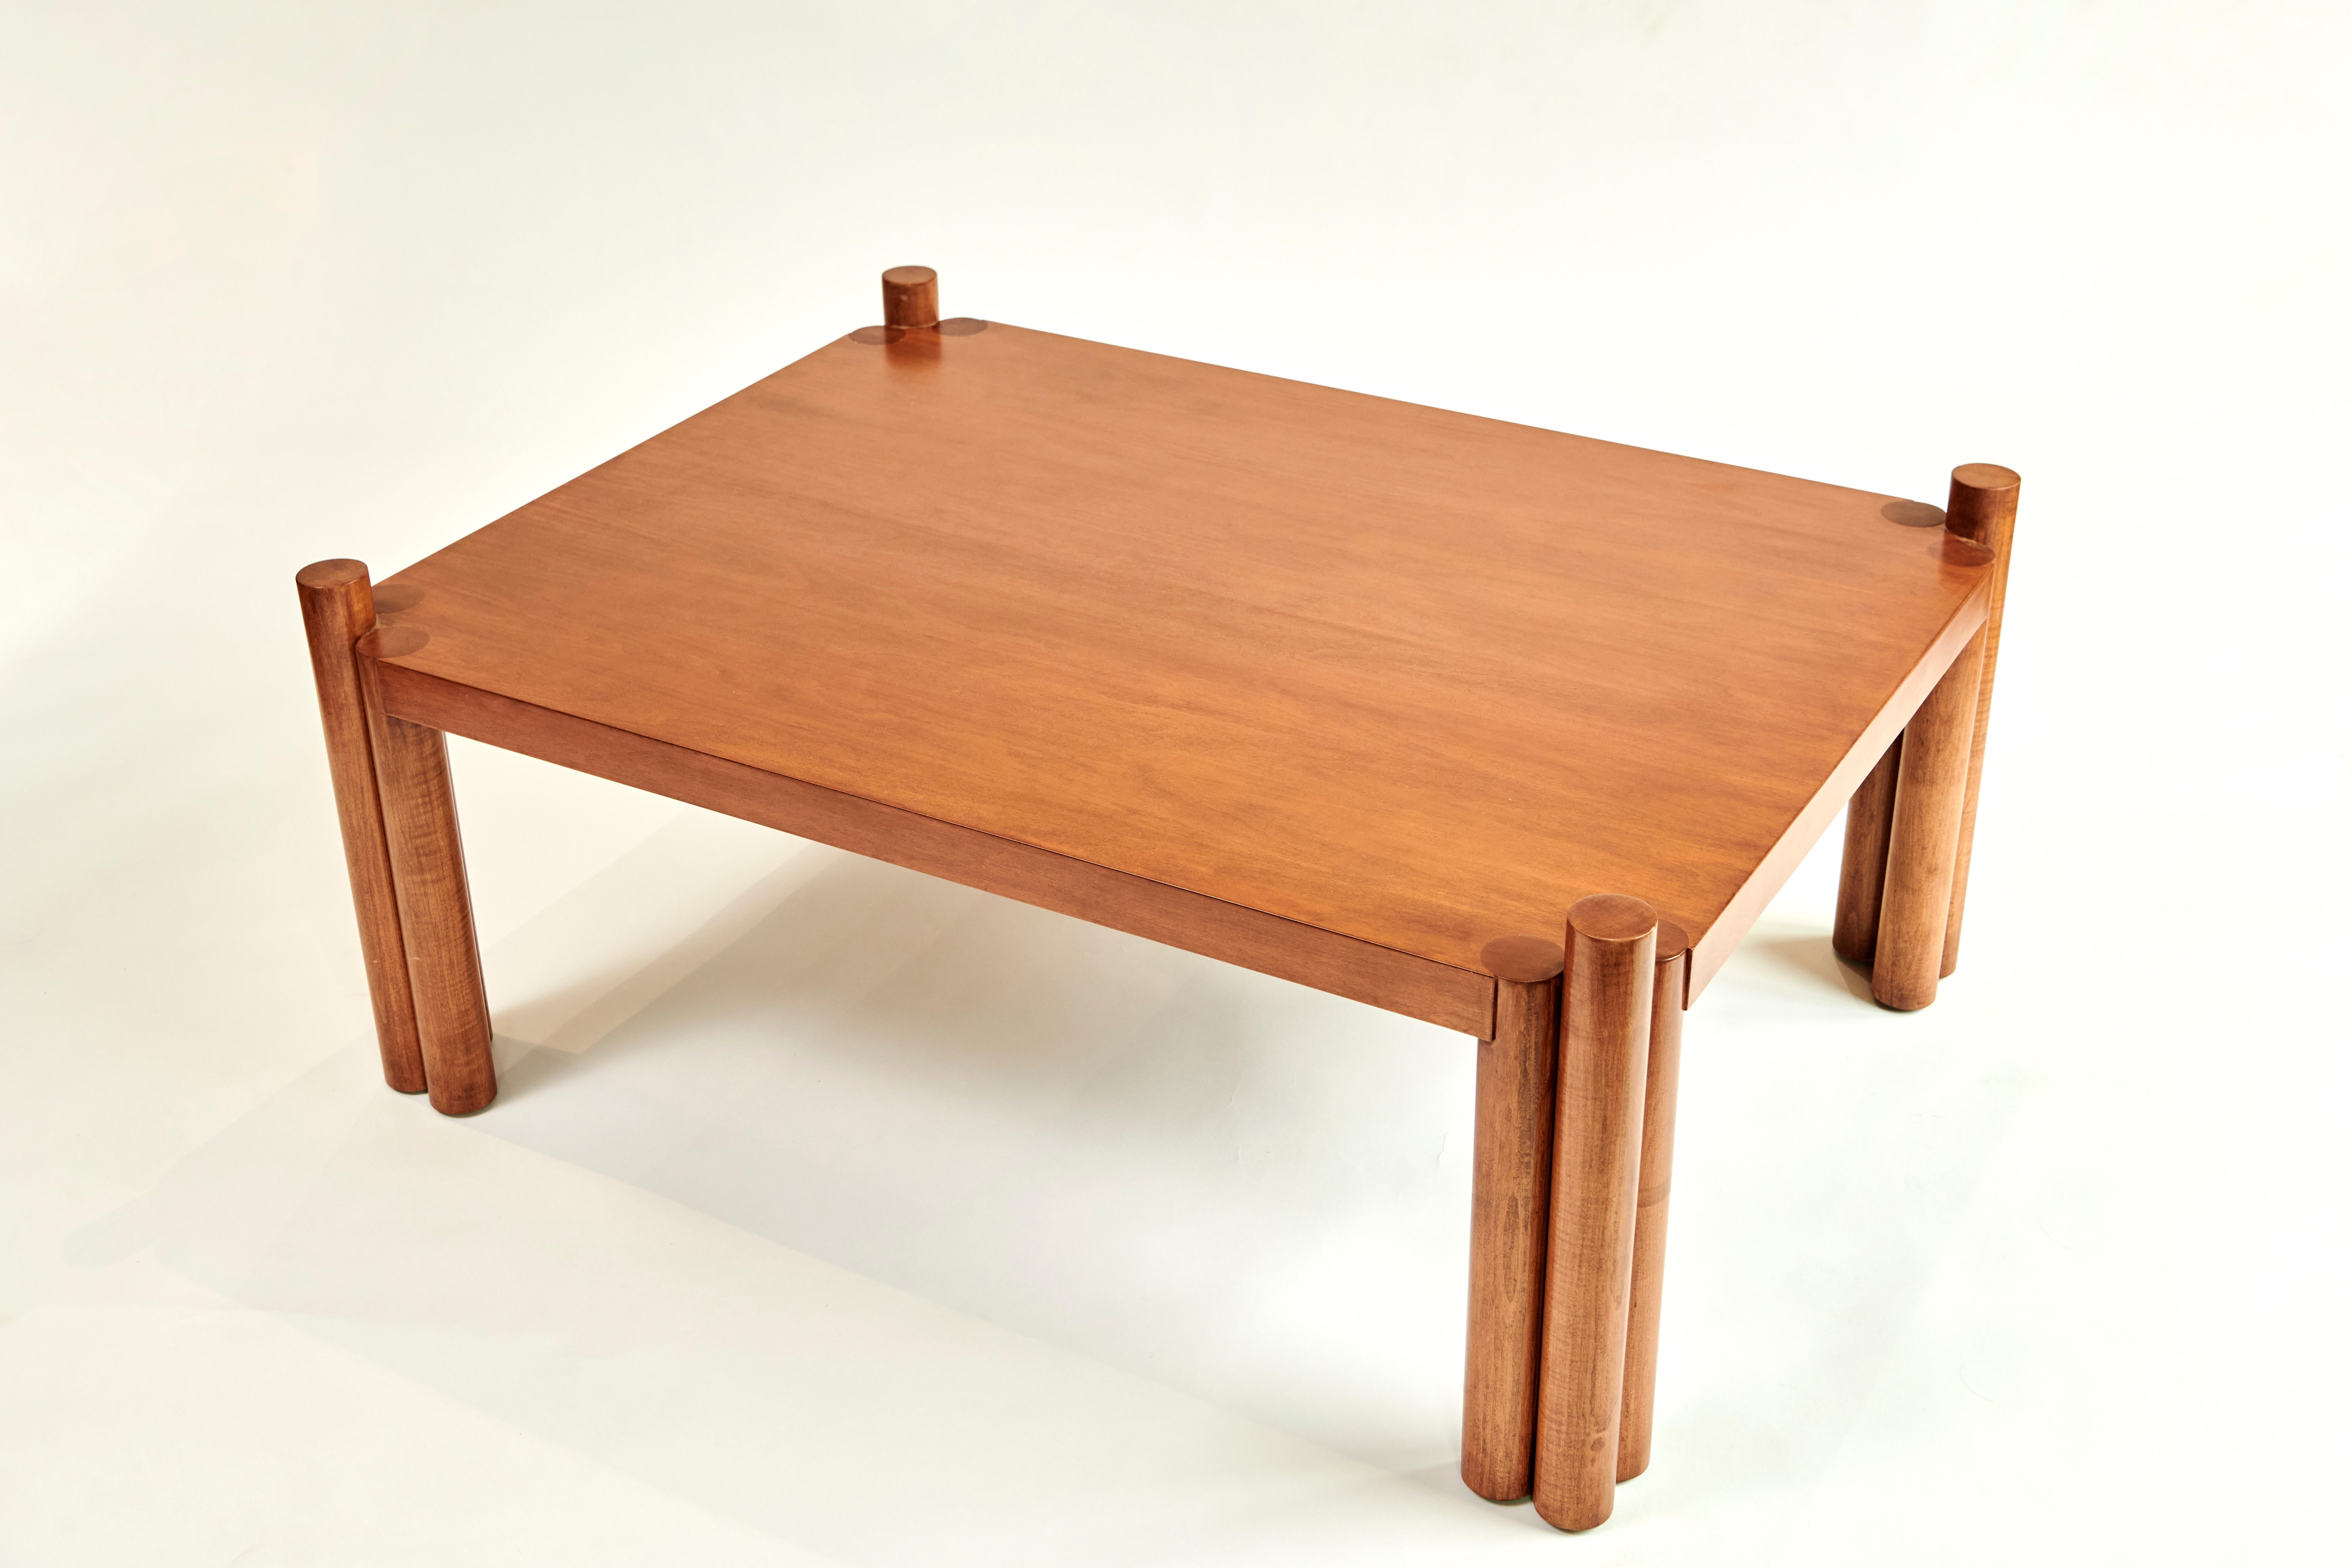 Made to order walnut coffee table designed by Christian Siriano.

Material: Walnut (available in custom finish)

Dimensions:
Overall Width: 47”
Overall Depth: 36” 
Overall Height: 20”
